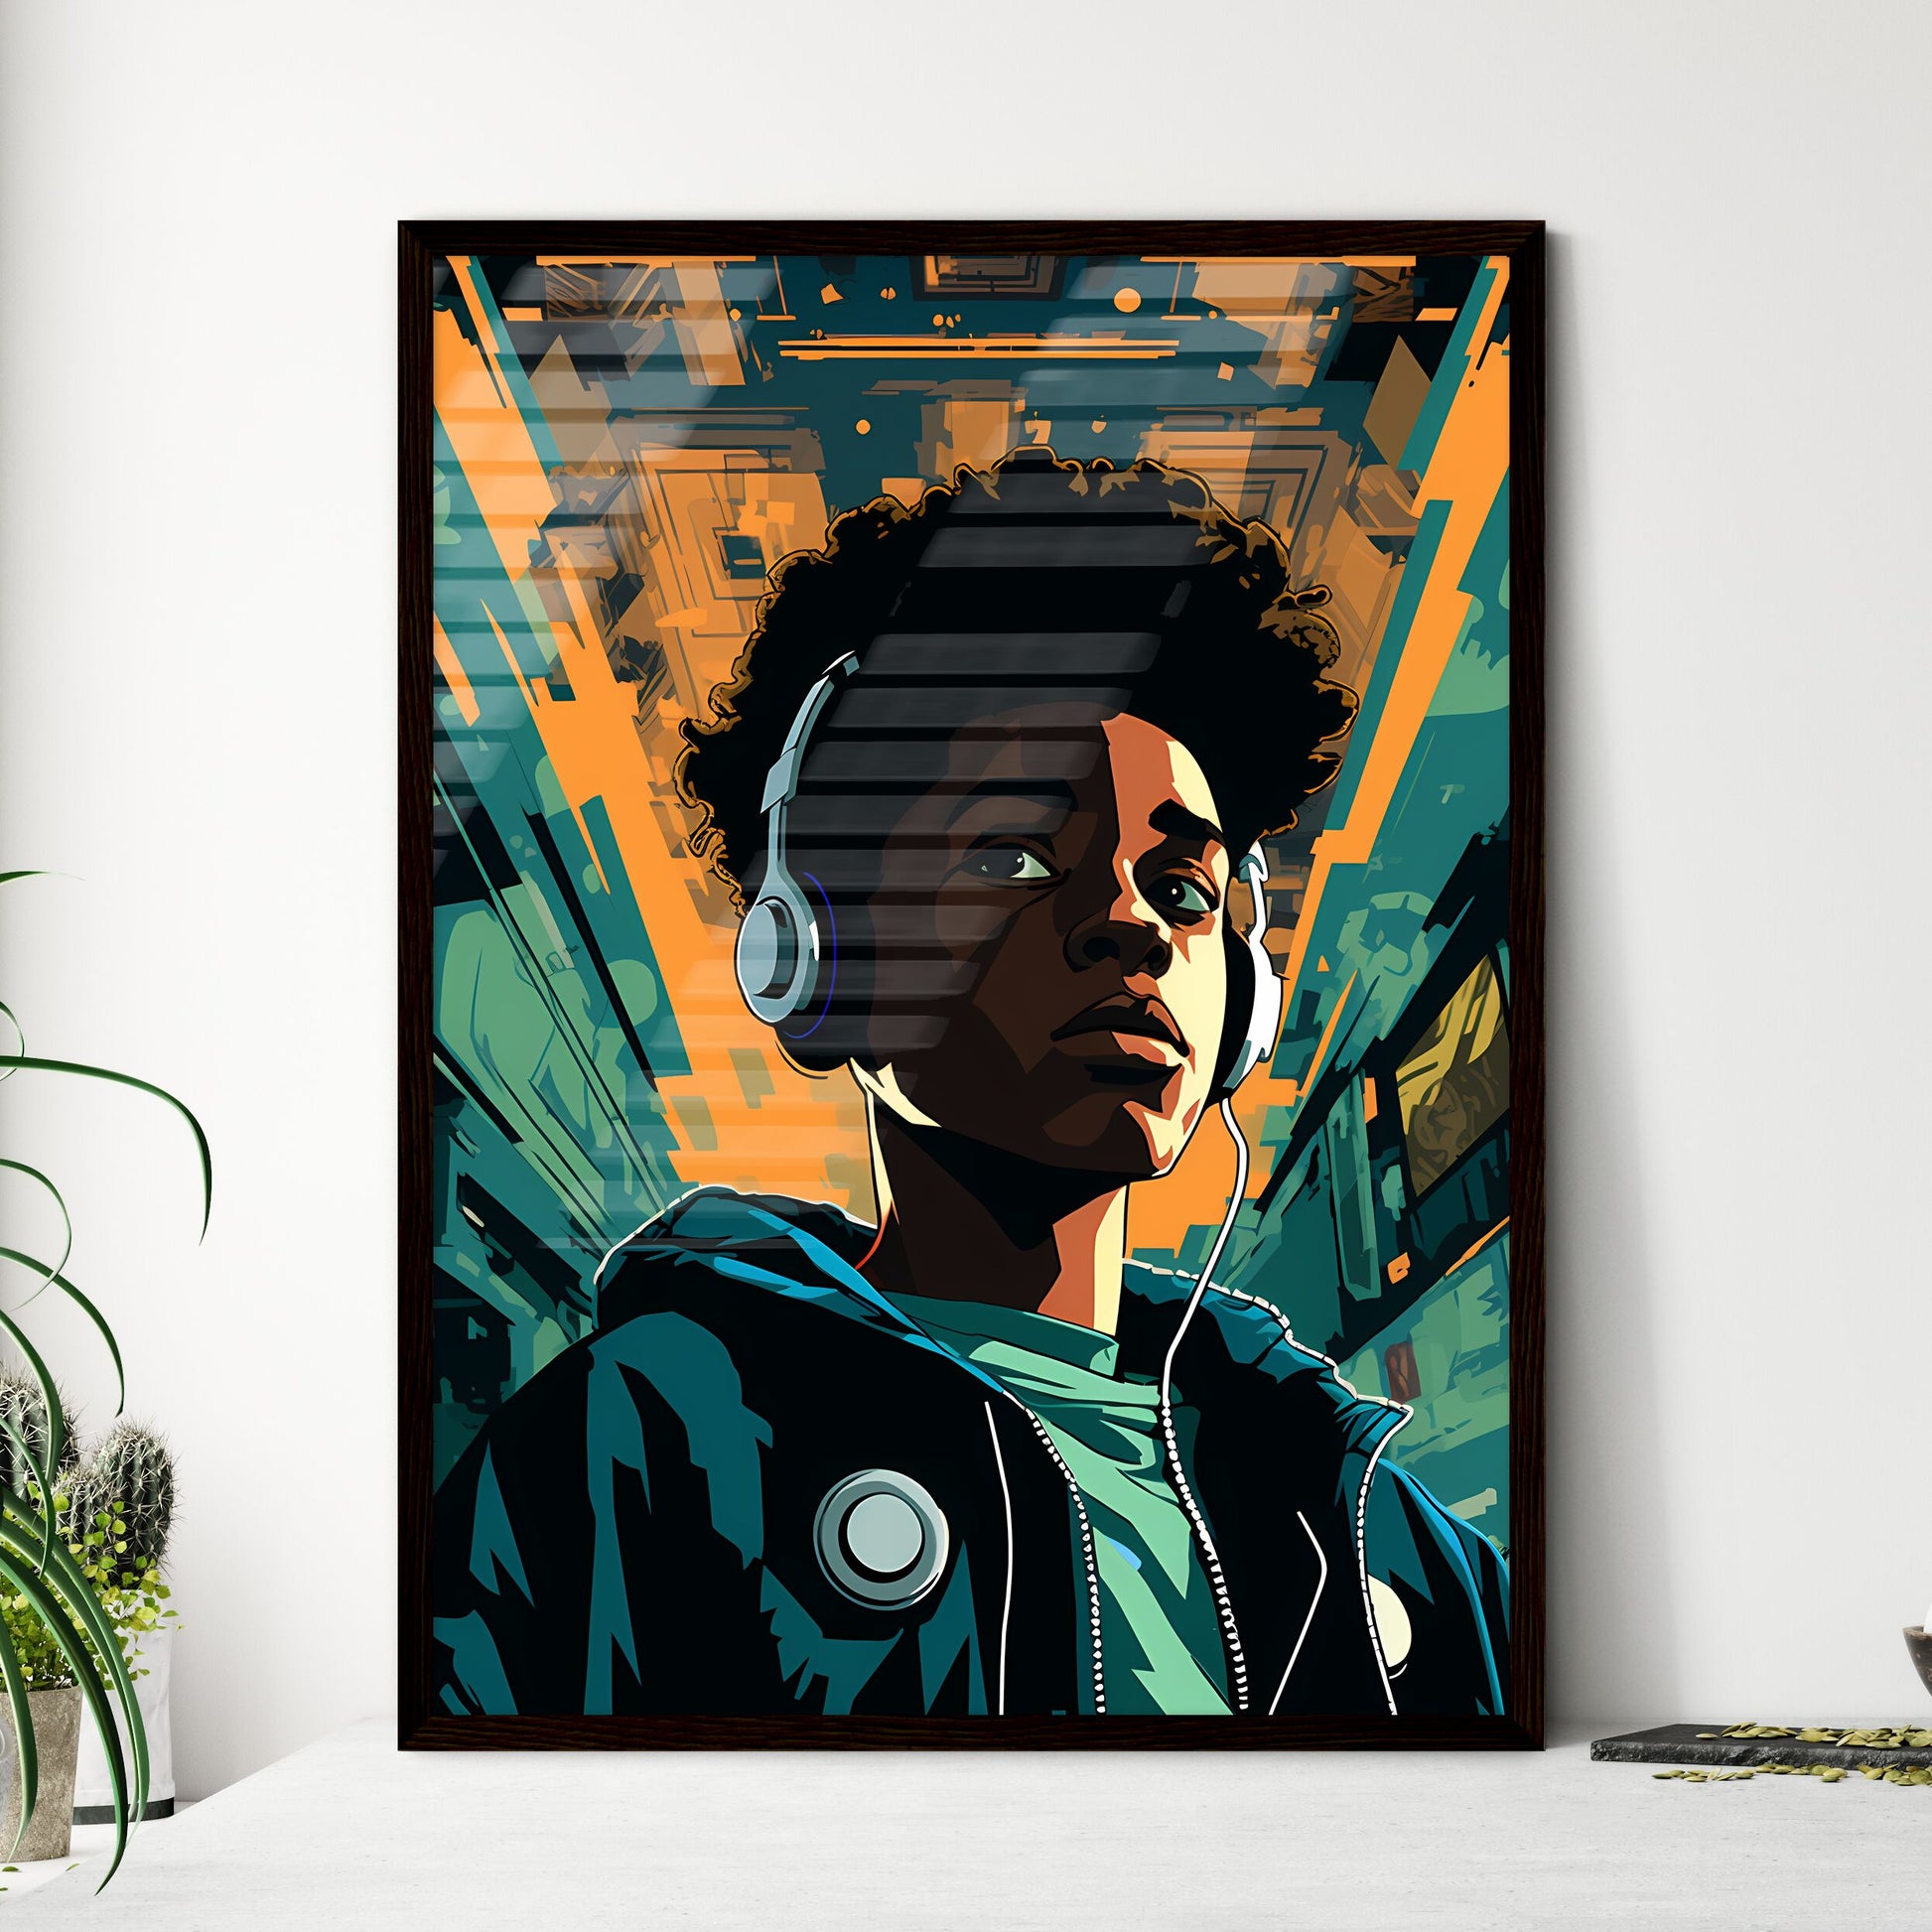 A Poster of a black teenager listening - A Boy Wearing Headphones And Looking Up Default Title